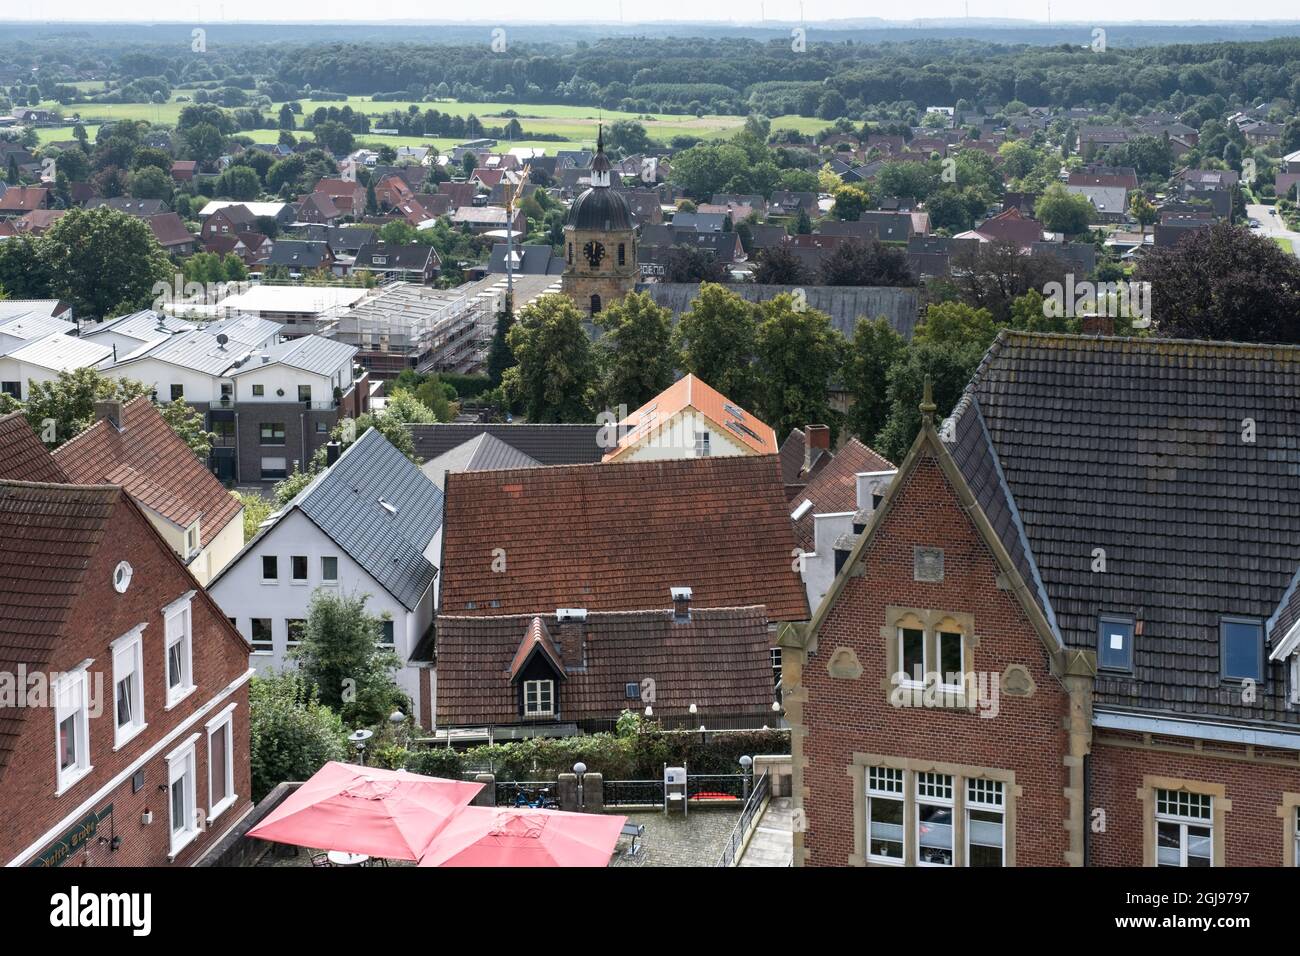 Aerial view of the old town with many buildings with a red roof in the german city of Bad Bentheim Stock Photo